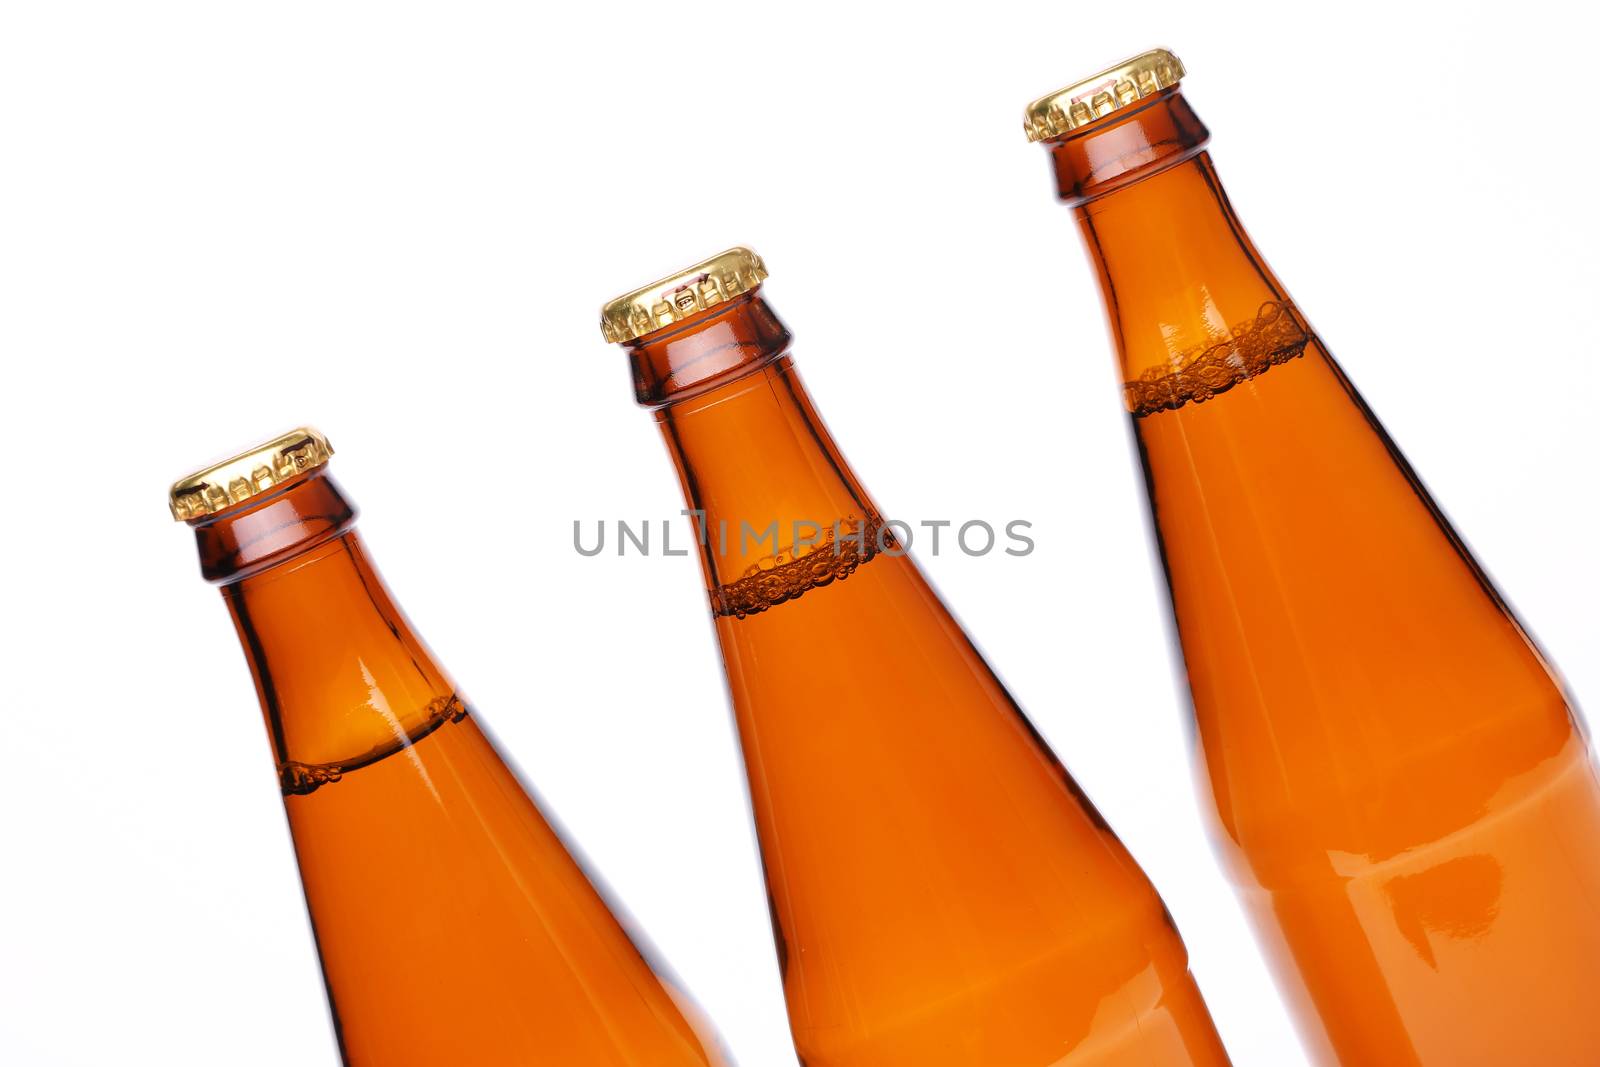 Three closed bottles at an angle, iIsolated on white.